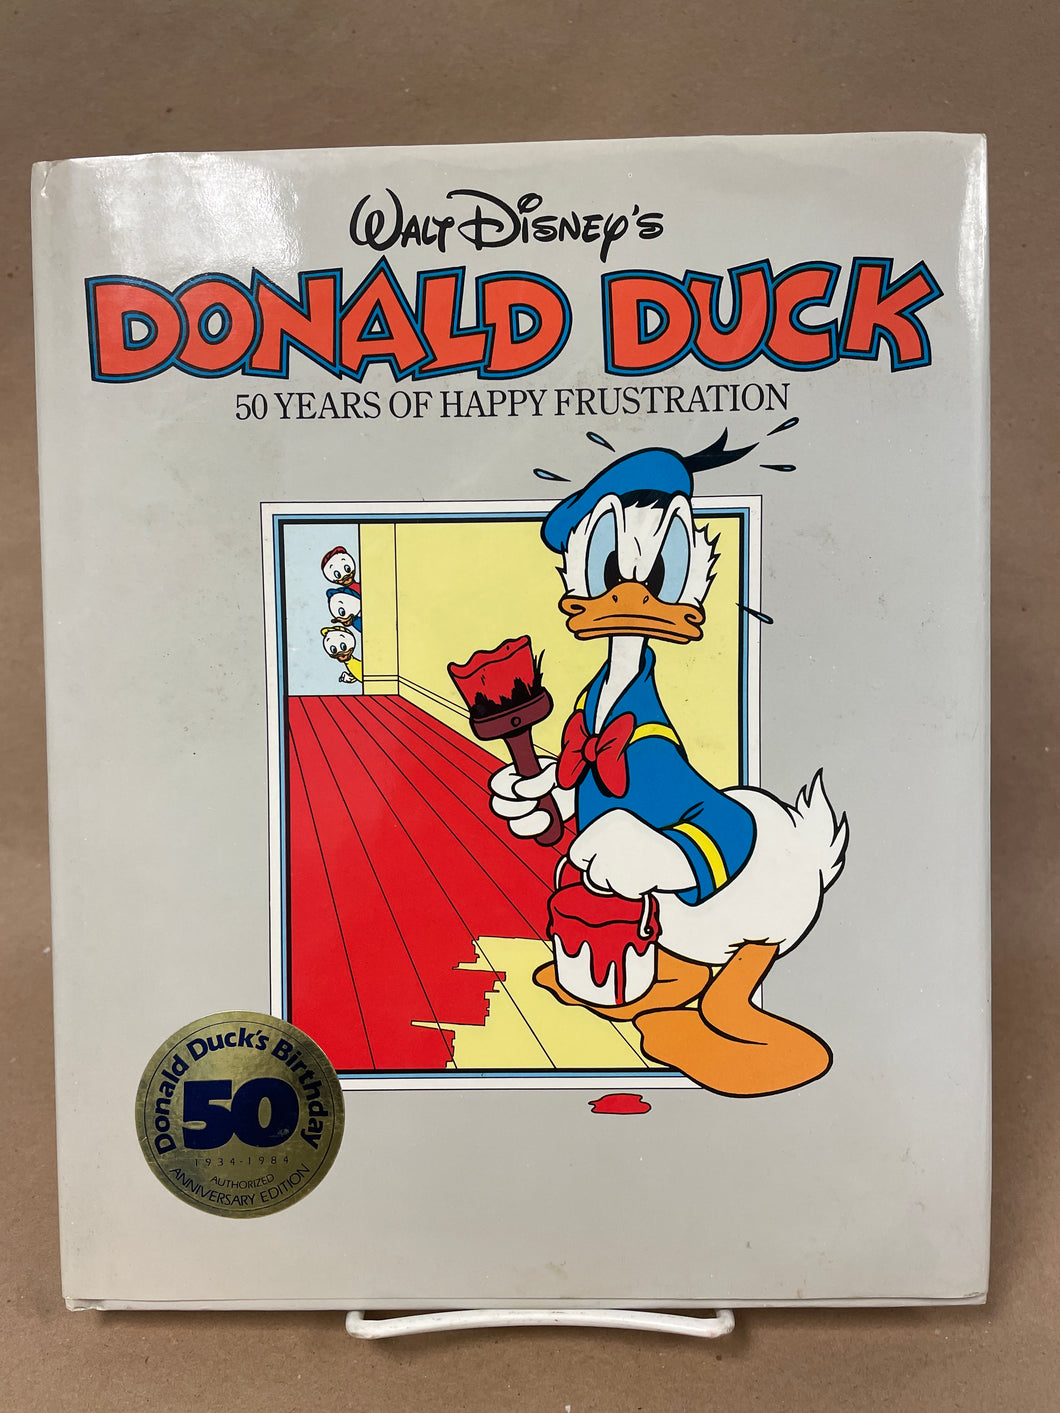 GN  Walt Disney's Donald Duck:  50 Years of Happy Frustration, Parry-Crooke, Charlotte, ed. [1984] N 11/23